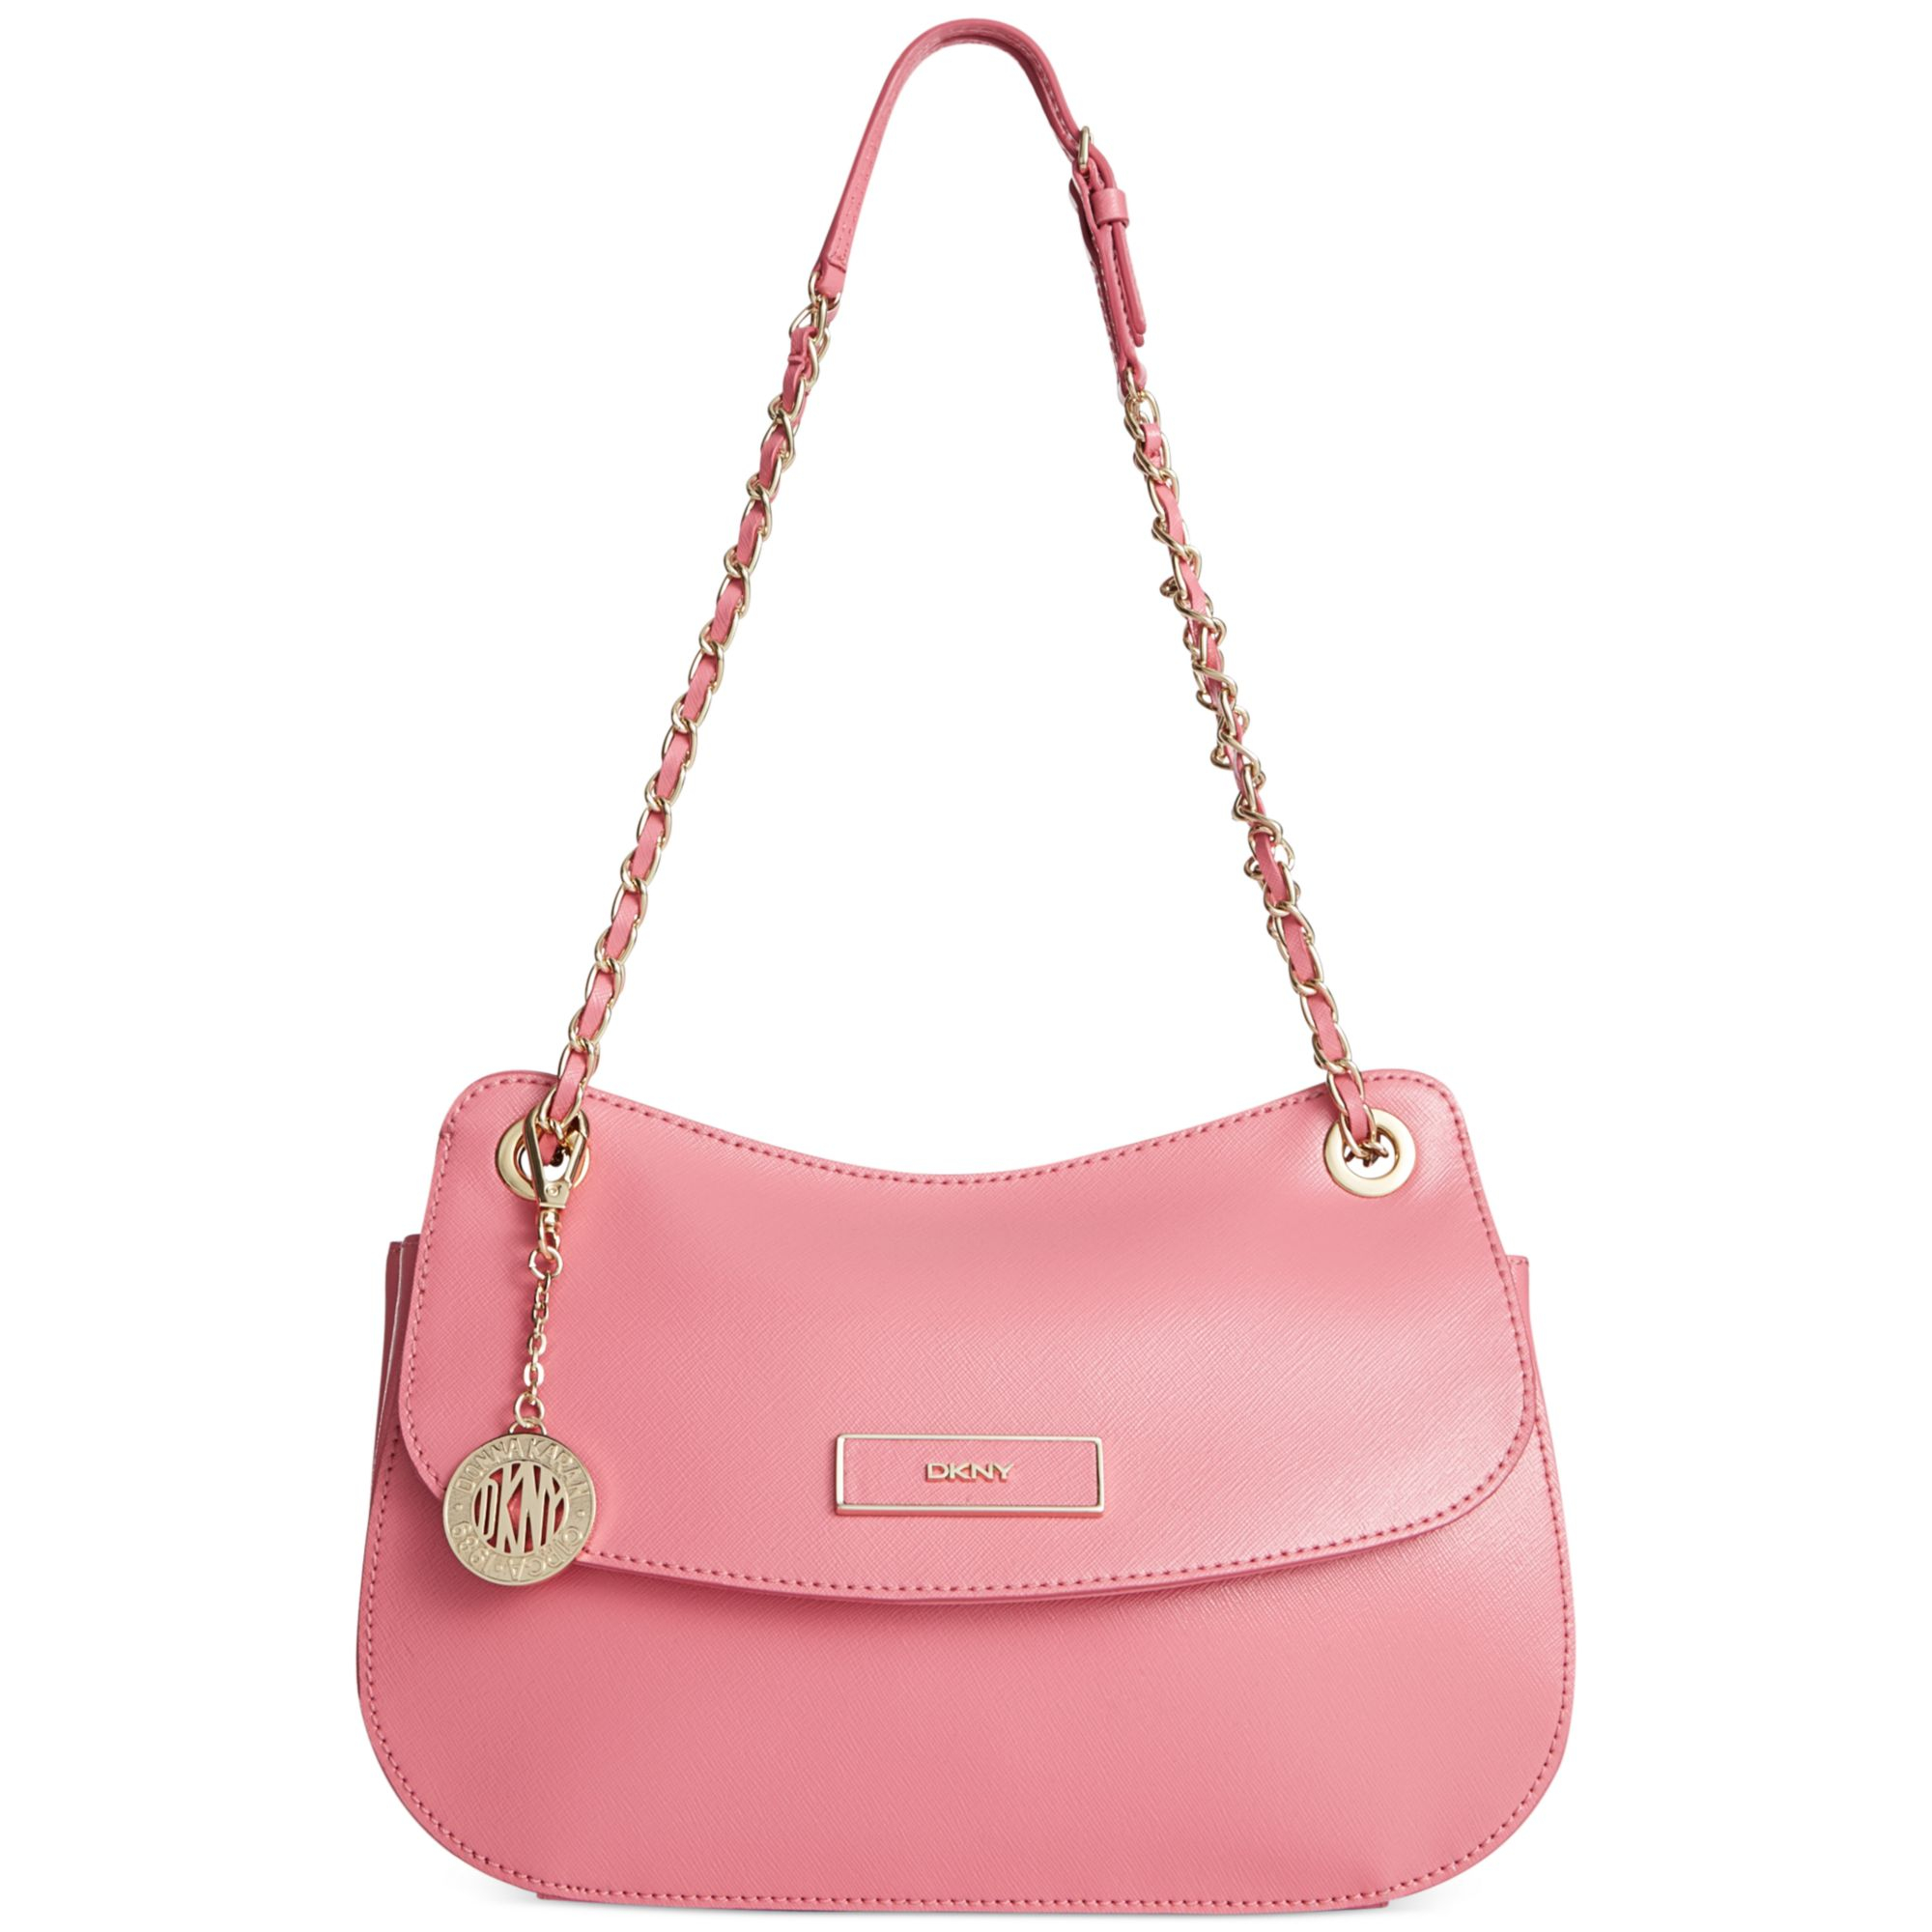 Dkny Shiny Saffiano Flap Bag in Pink | Lyst